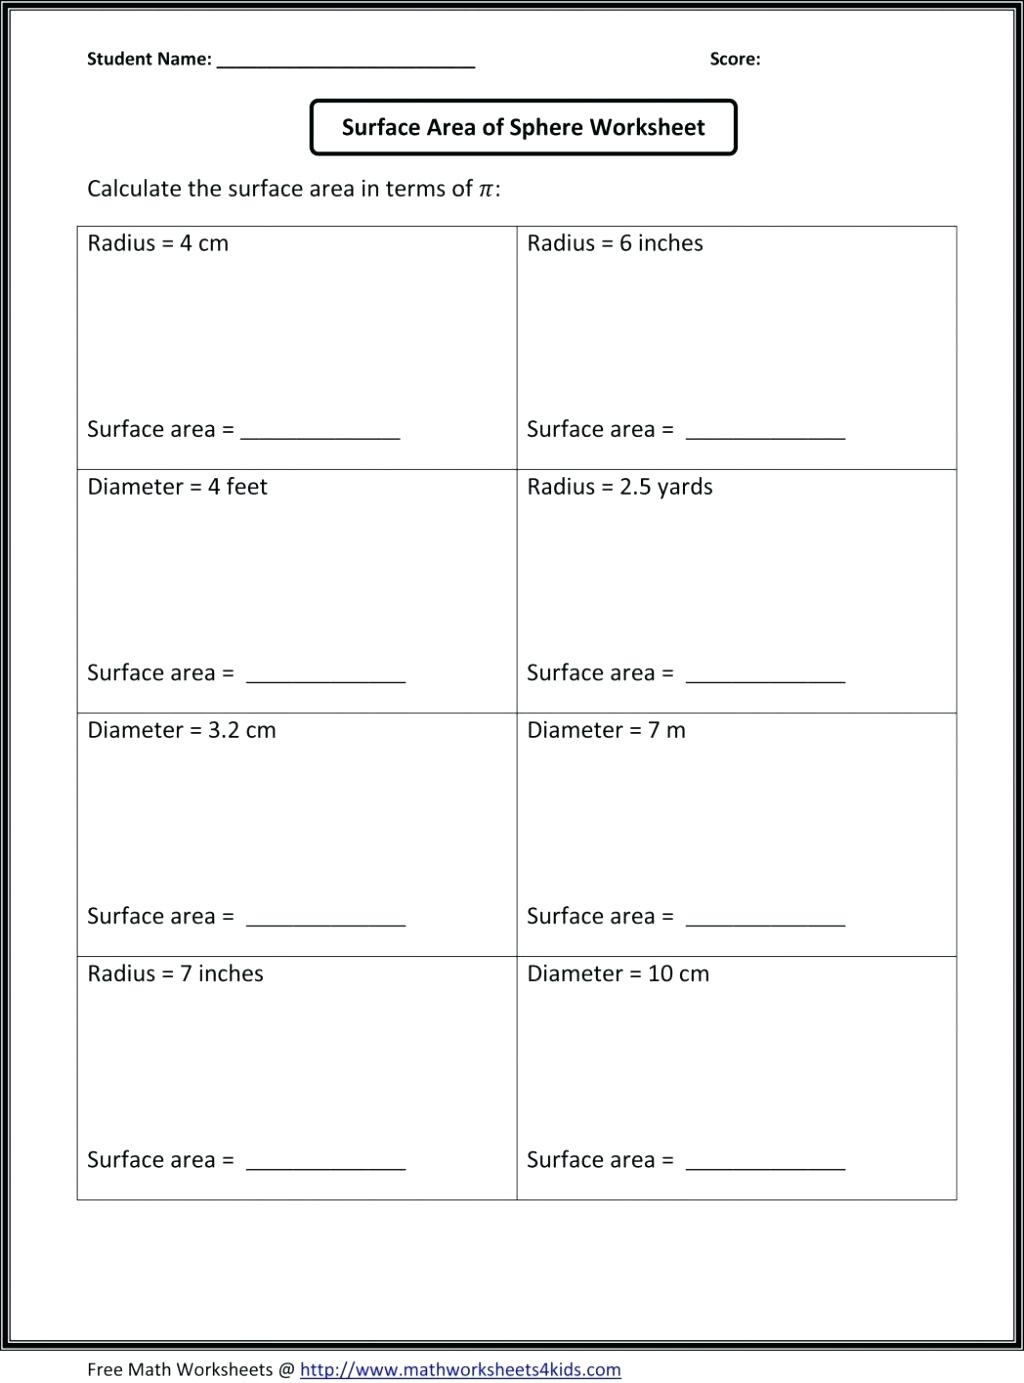 Ged Math Test Prep Prepare For The Math Test Ged Math Practice Test - Free Printable Ged Worksheets